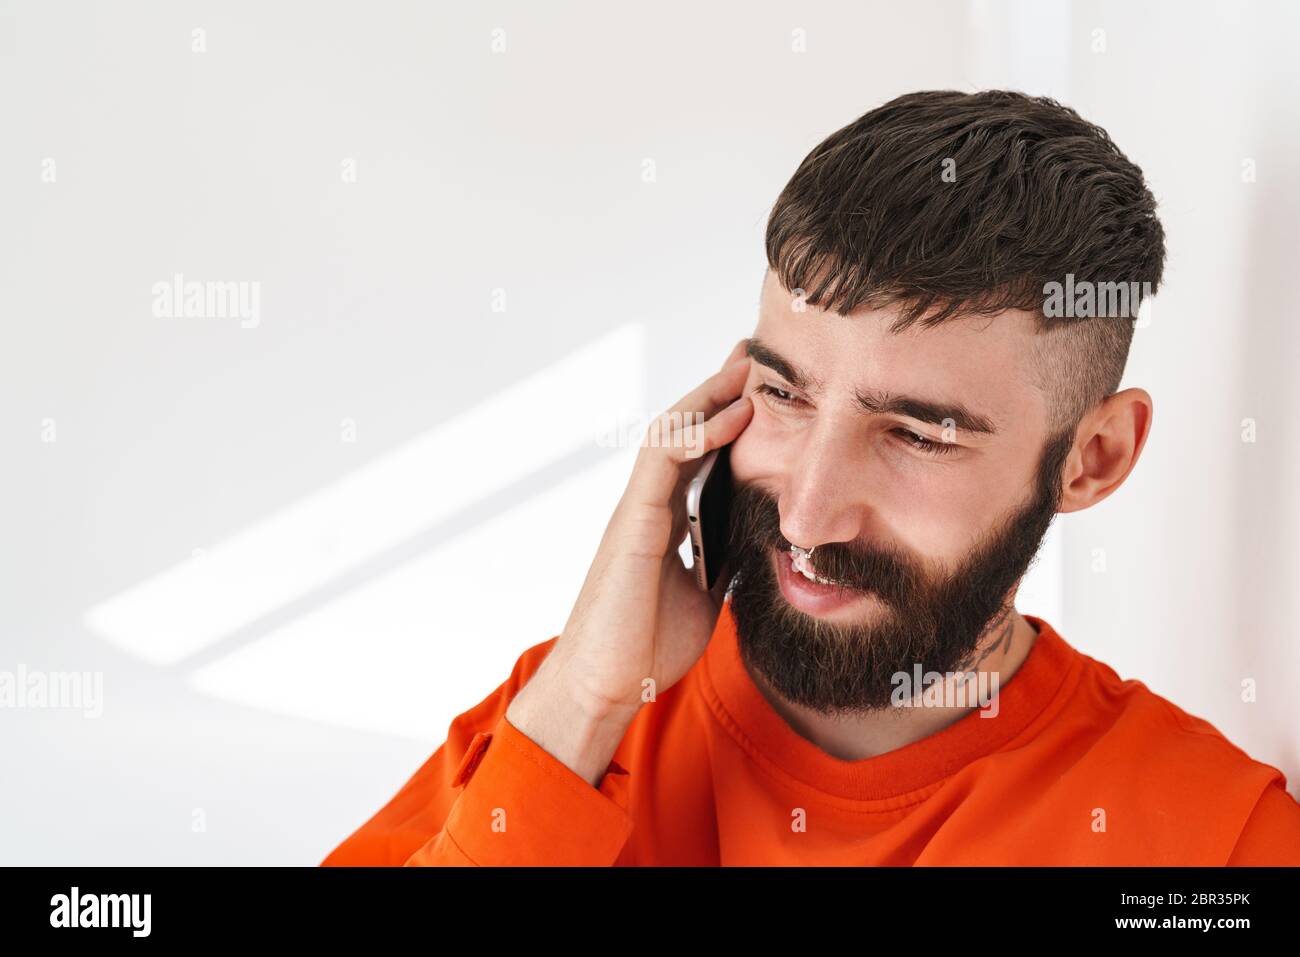 Image of young bearded man with nose jewelry wearing orange shirt talking on smartphone while standing over white wall indoors Stock Photo